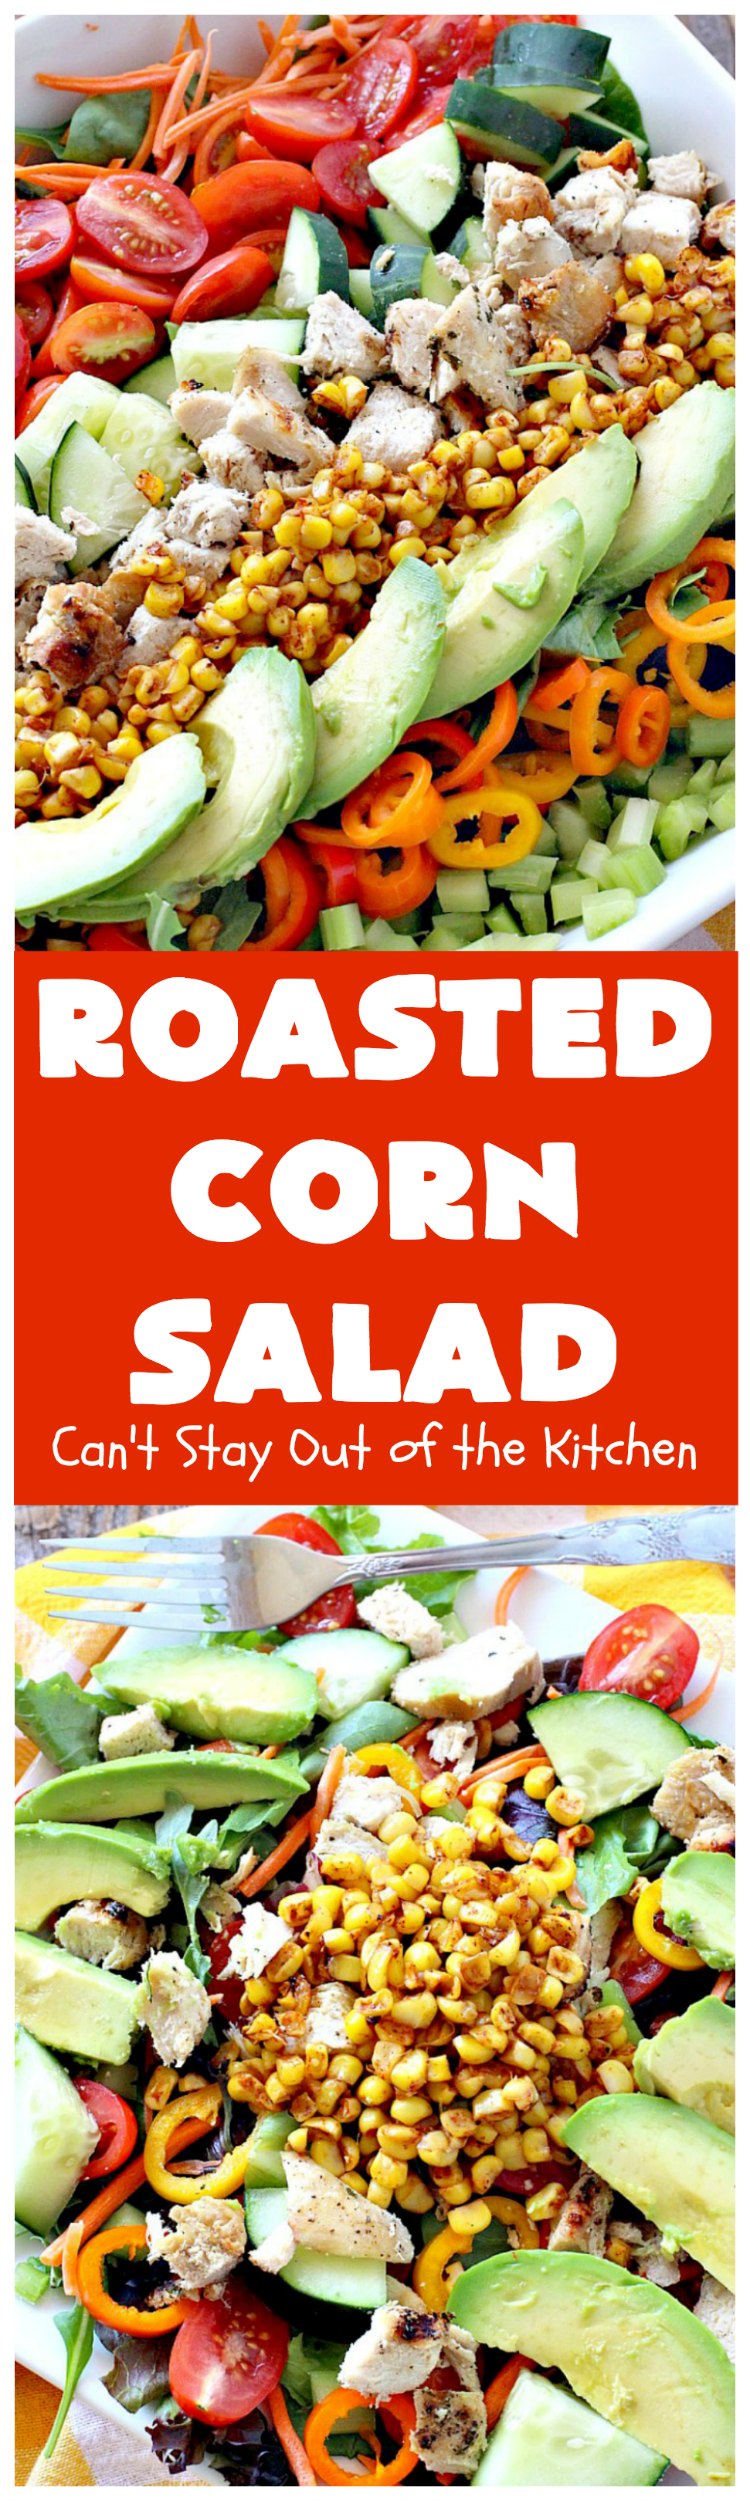 Roasted Corn Salad | Can't Stay Out of the Kitchen